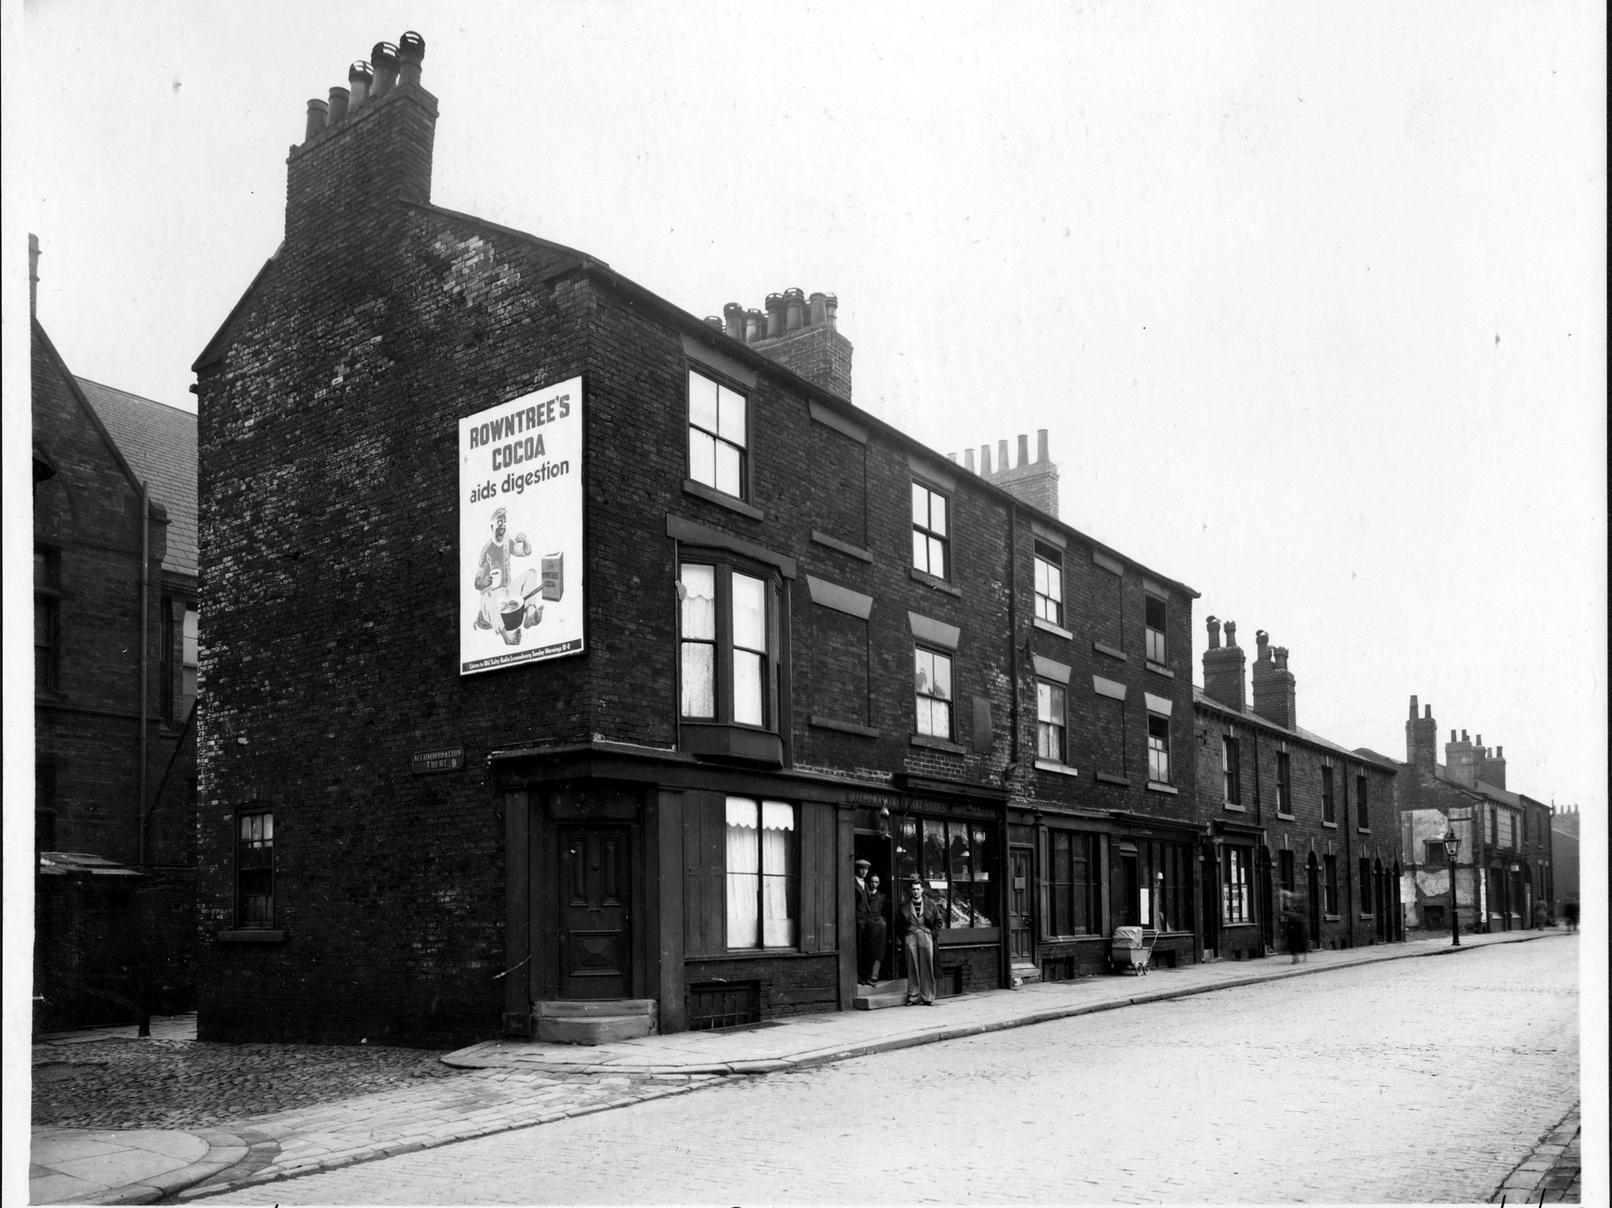 Accommodation Road in Burmantofts. There is a gap where the Spinners Arms public house had been demolished. A pram is outside the doctors. A poster for Rowntree's Cocoa on the end wall.